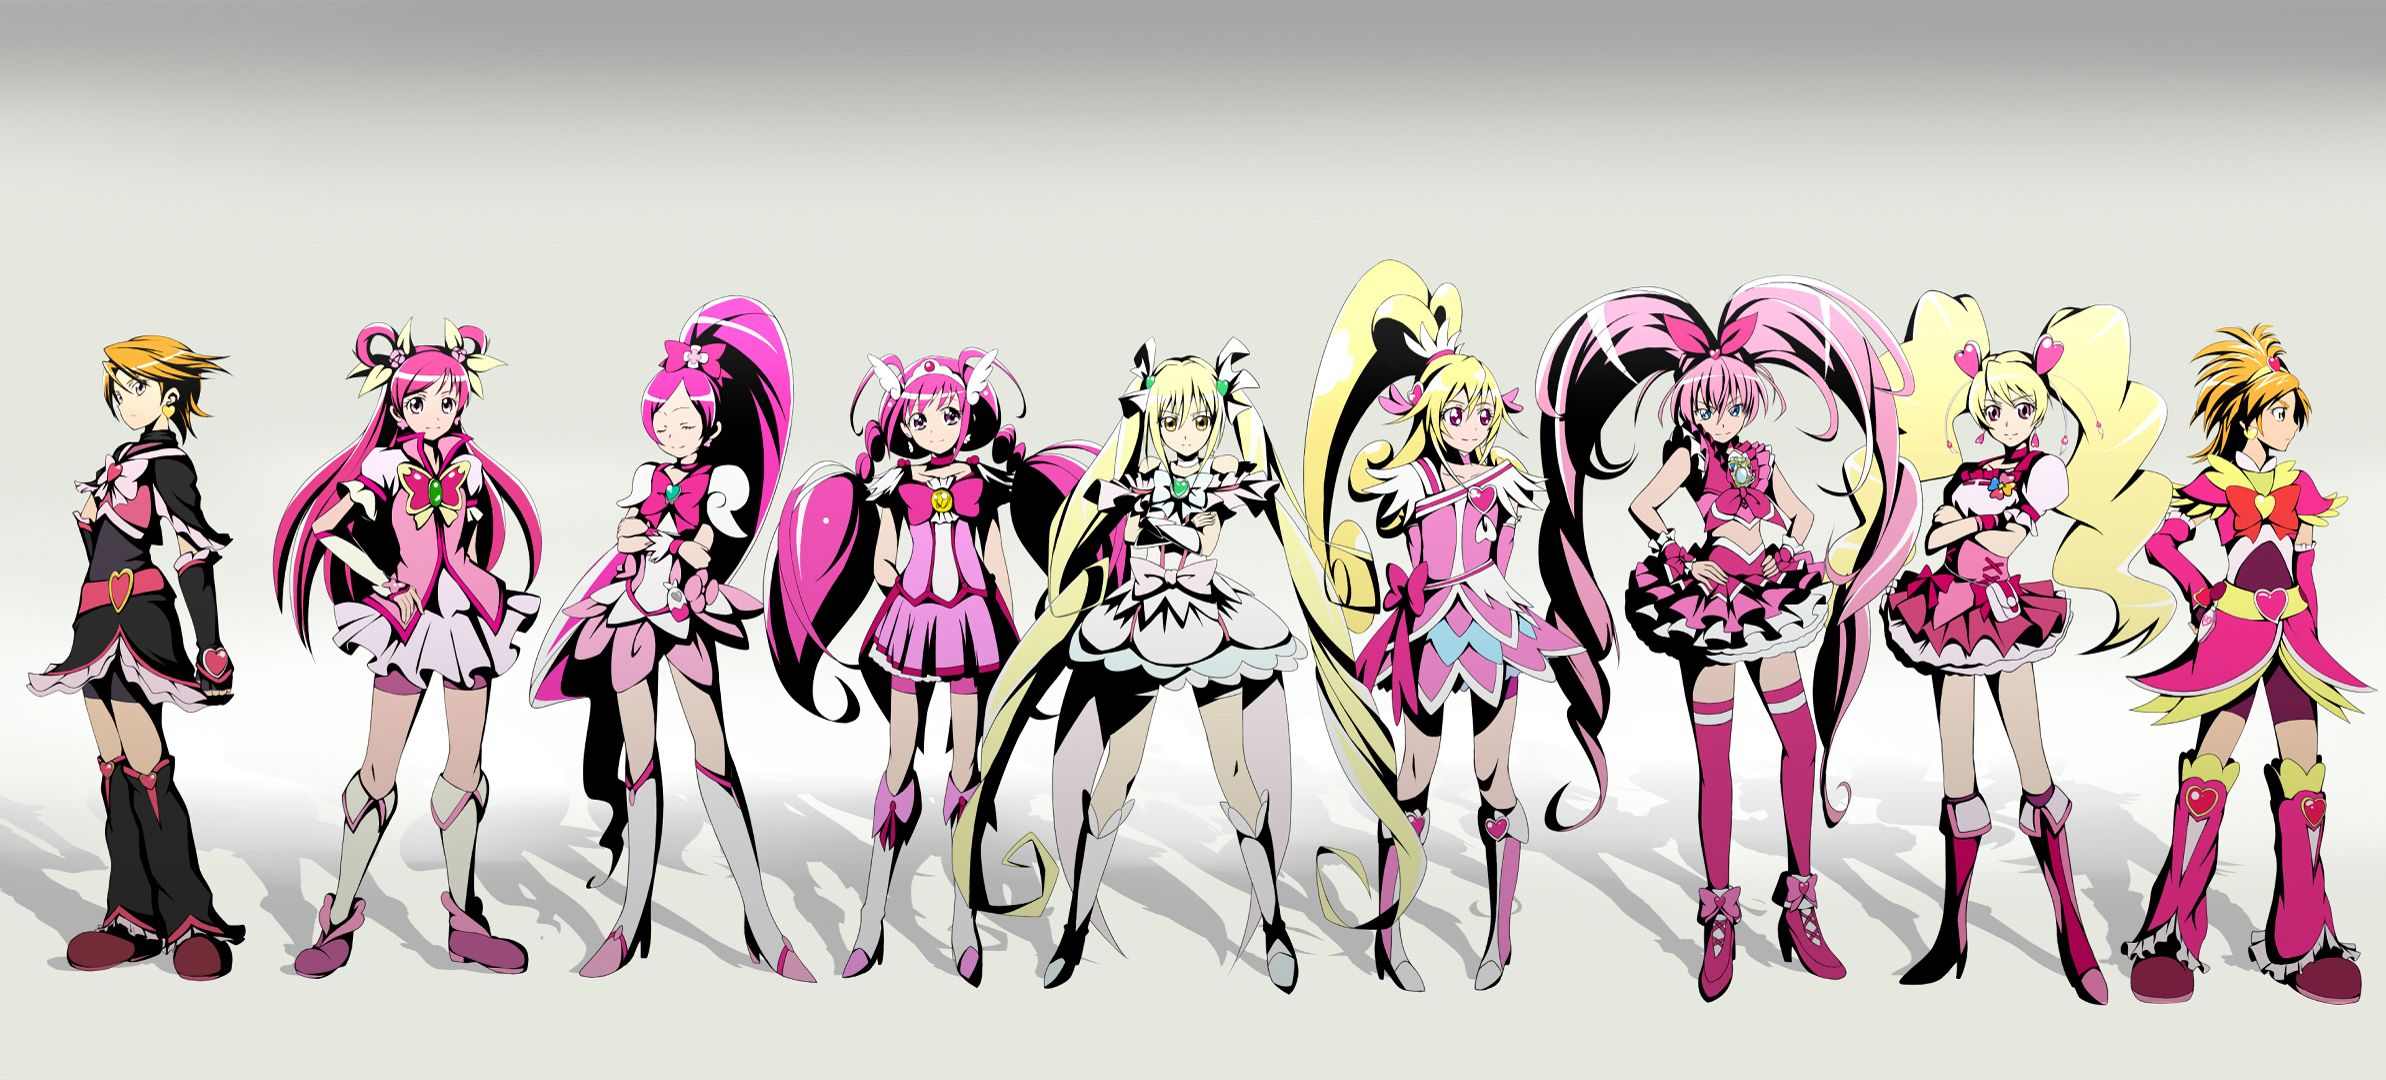 Pretty Cure All Stars Wallpapers - Wallpaper Cave